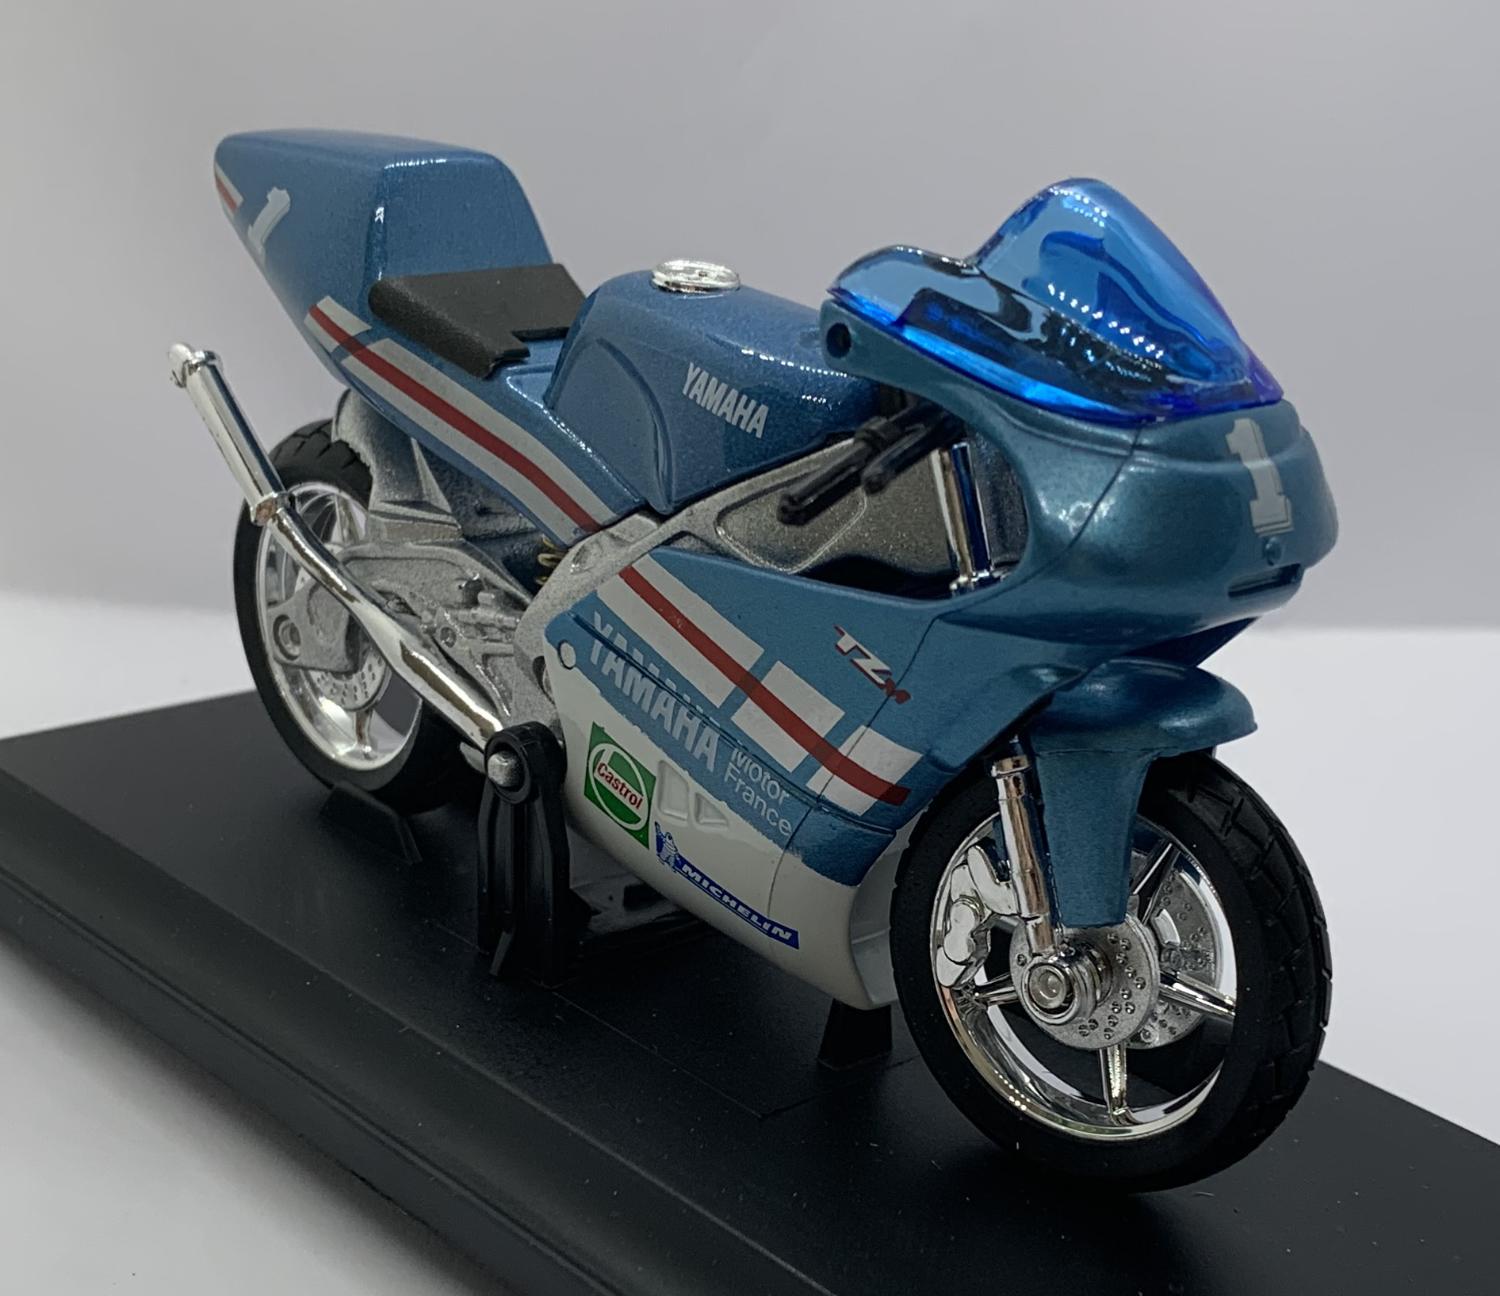 Yamaha TZ250M 1994 in blue and silver 1:18 scale motorbike model from welly